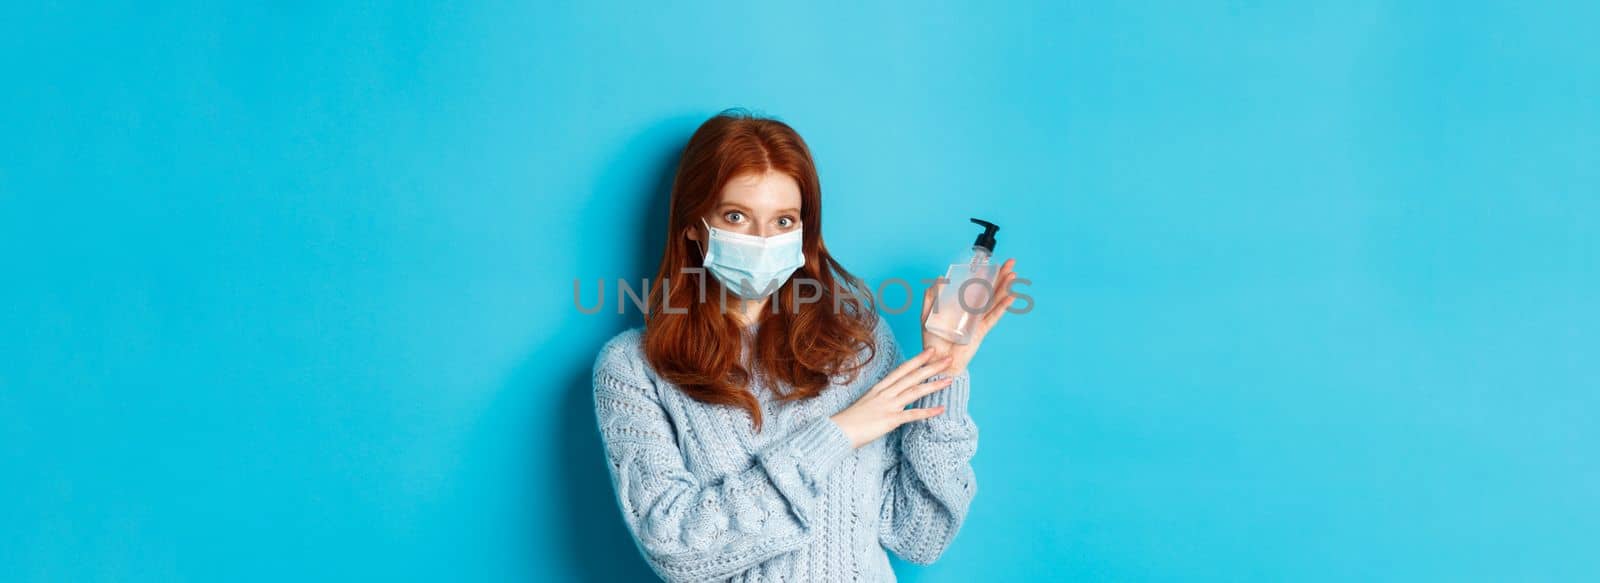 Winter, covid-19 and social distancing concept. Young redhead girl in face mask showing hand sanitizer, demonstrating antiseptic for disinfection, standing over blue background.